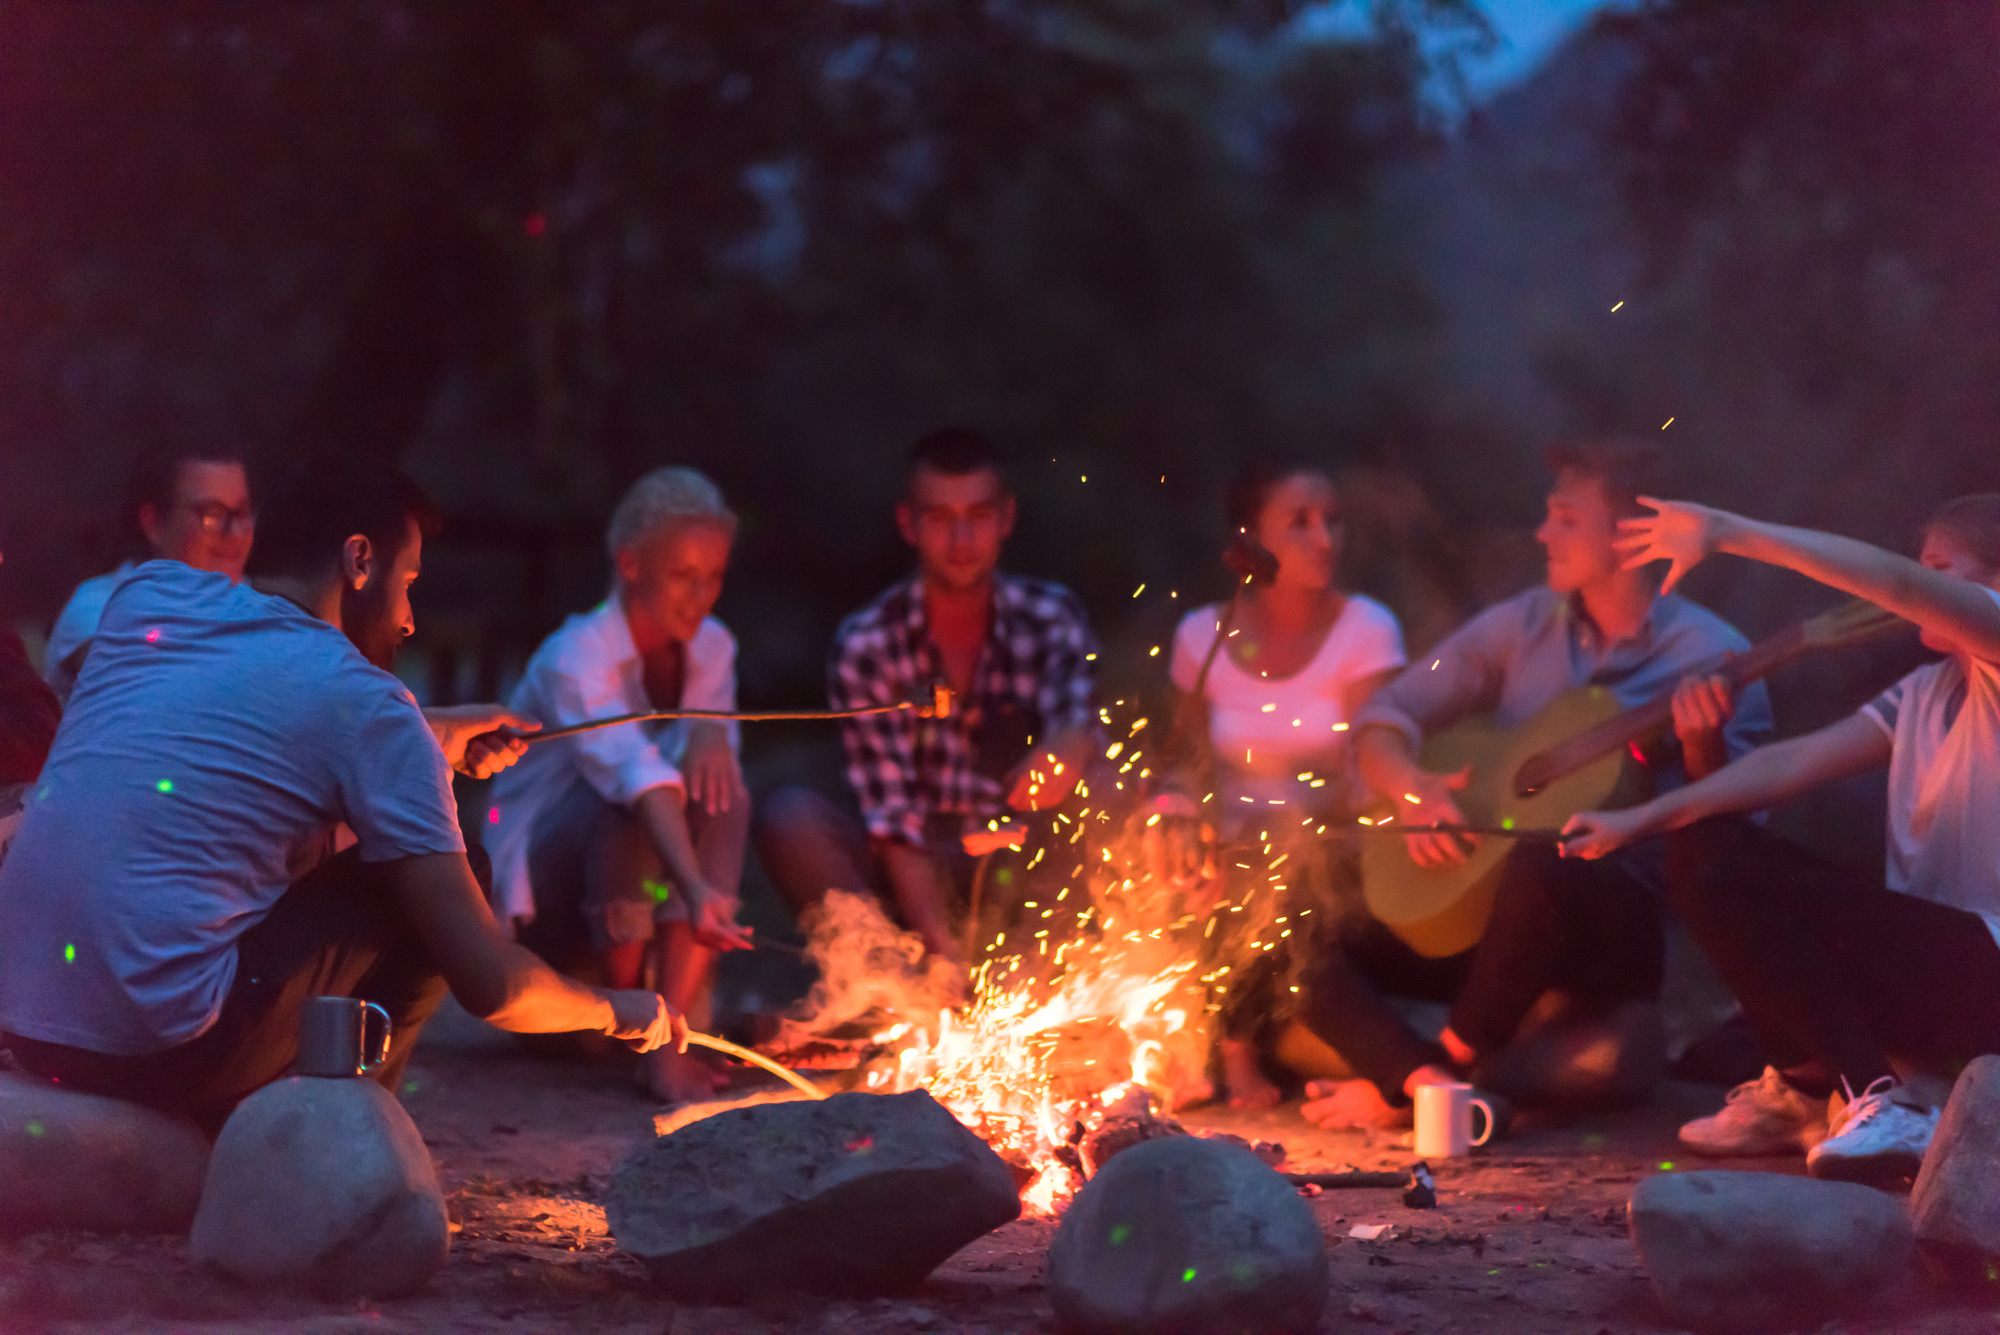 Group of people sitting next to a campfire making music